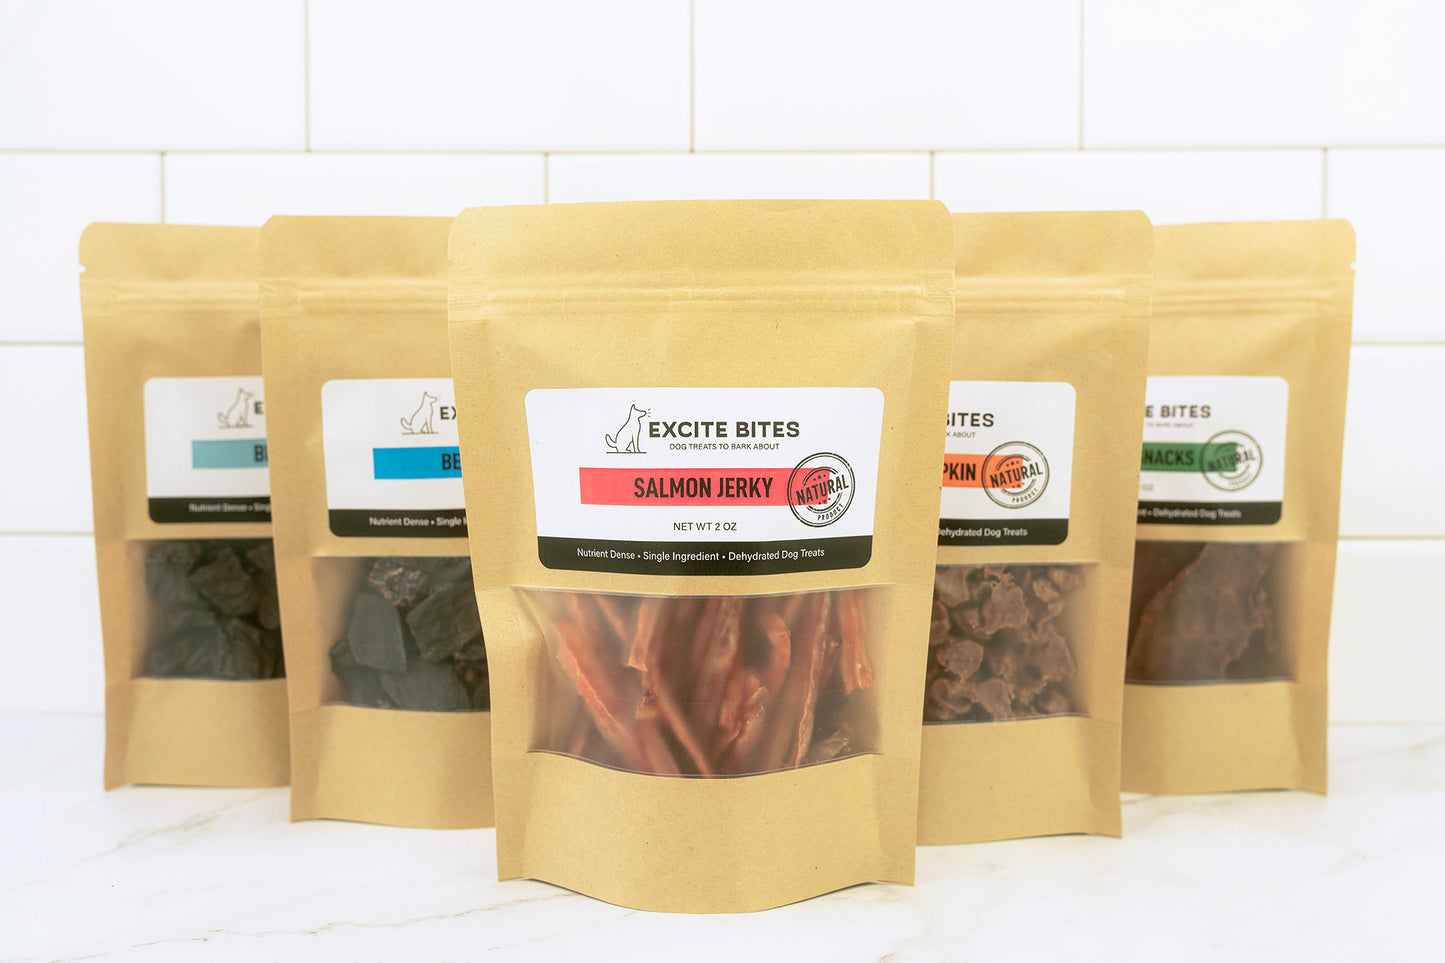 buy a bag of Excite Bites dog treats to be donated to local rescues